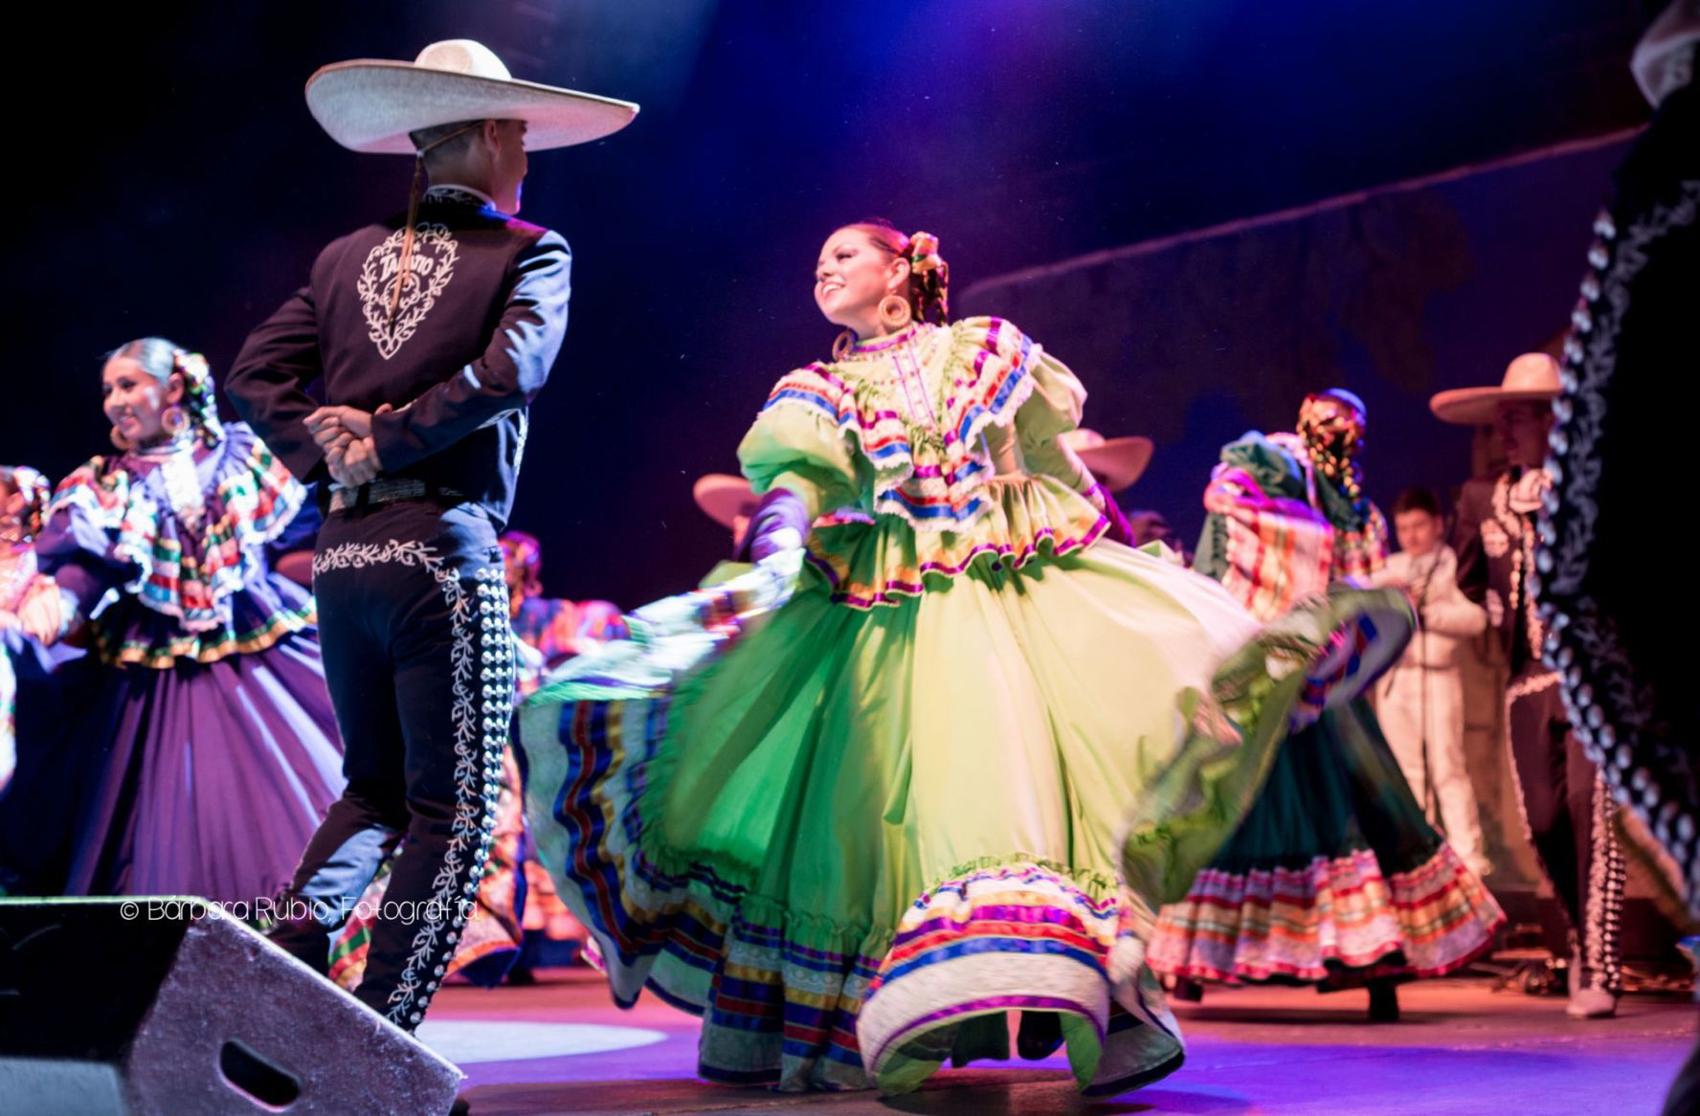 Everything you need to know A look at the history of mariachi in Tucson